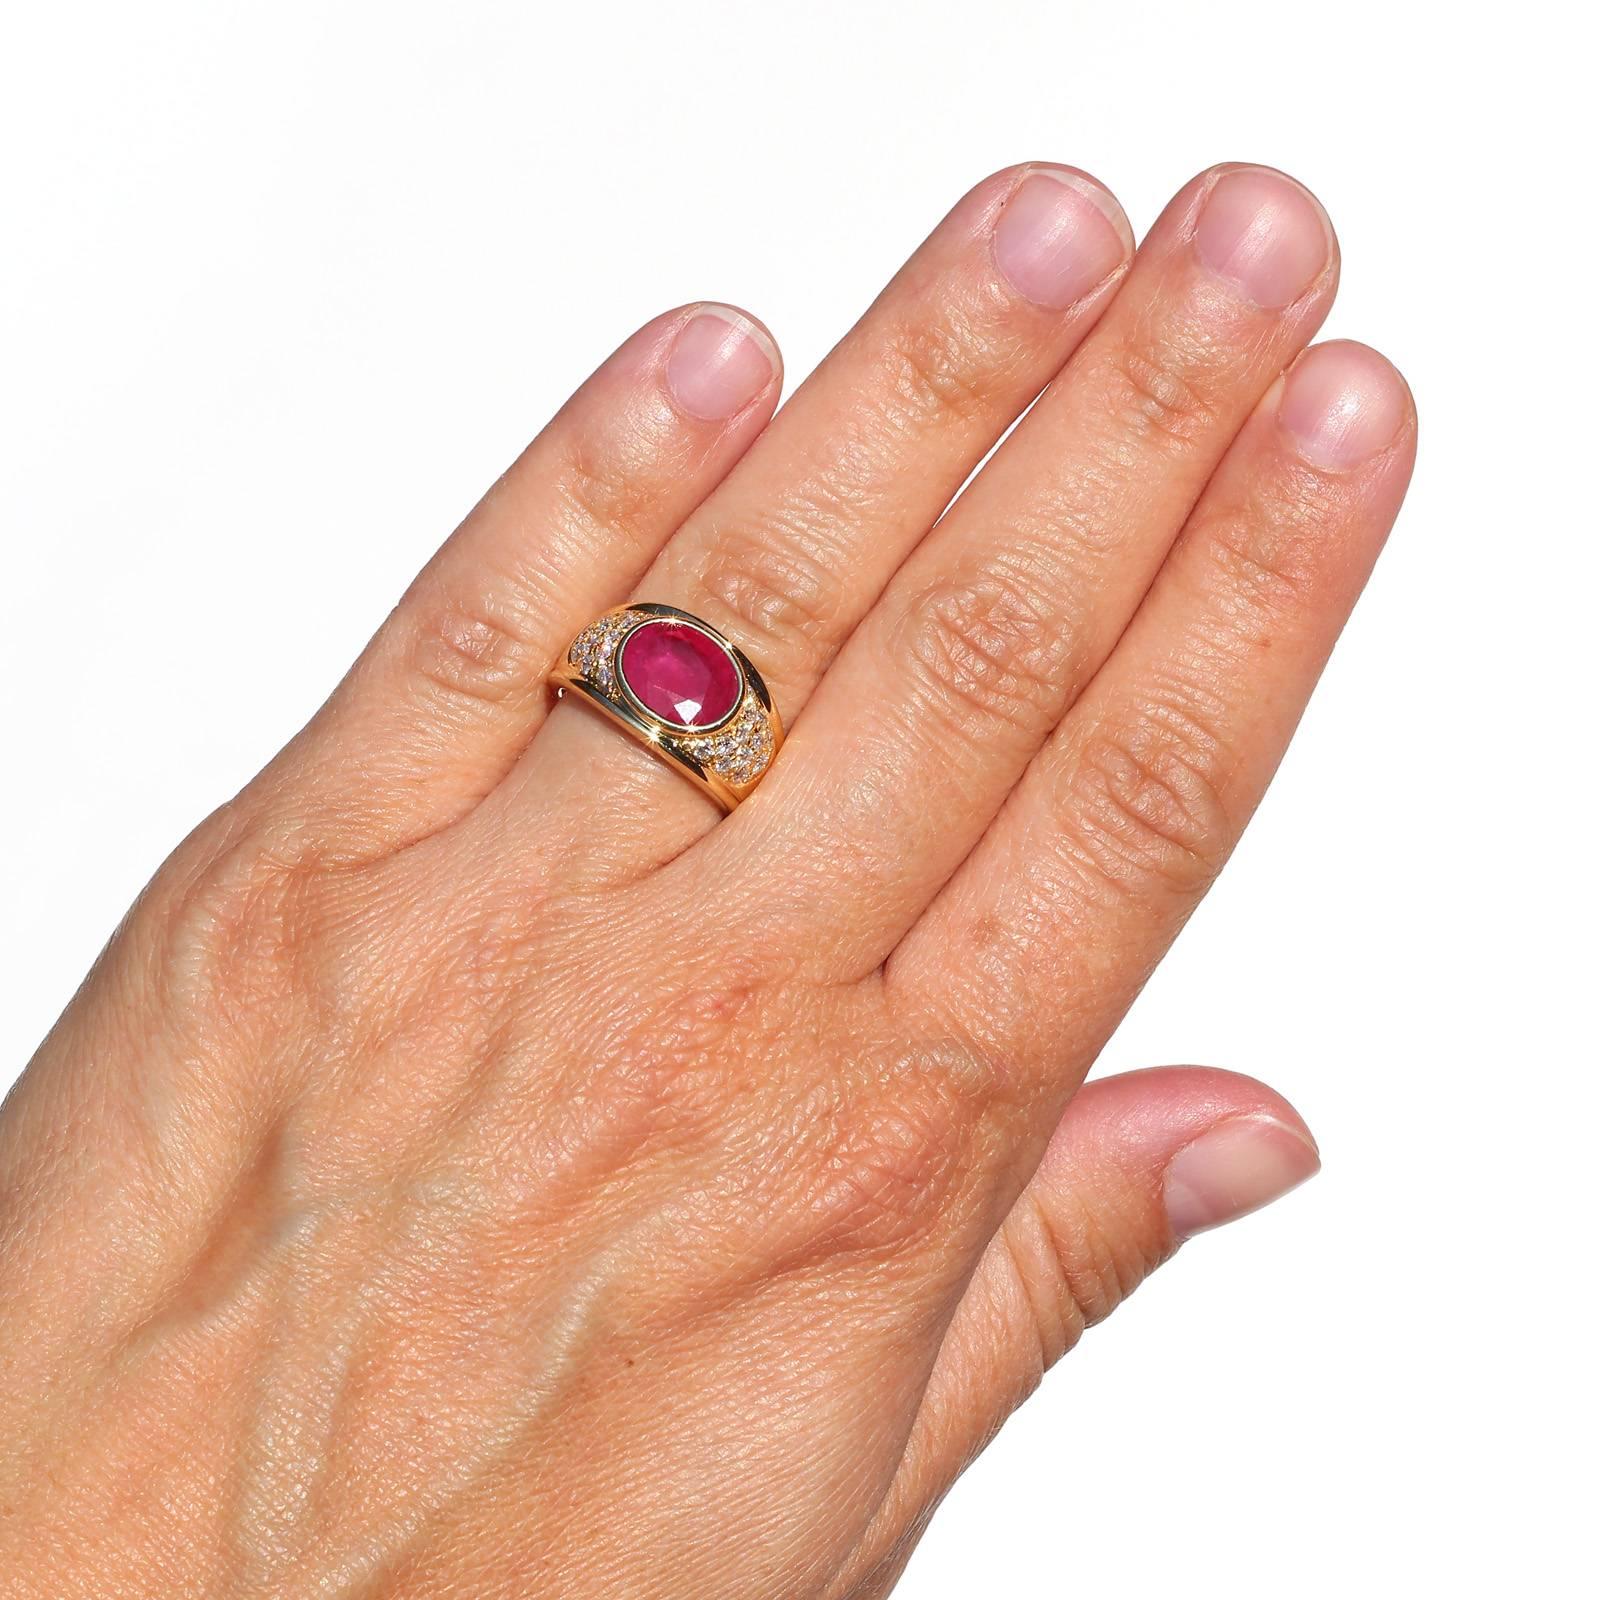 A bold 18KT yellow gold ring featuring a bezel set oval Burma heated Ruby weighing 2.09 carats.  The half dome setting is accented with 0.55 carat of Round Brilliant Cut Diamonds.  The ring has great character!